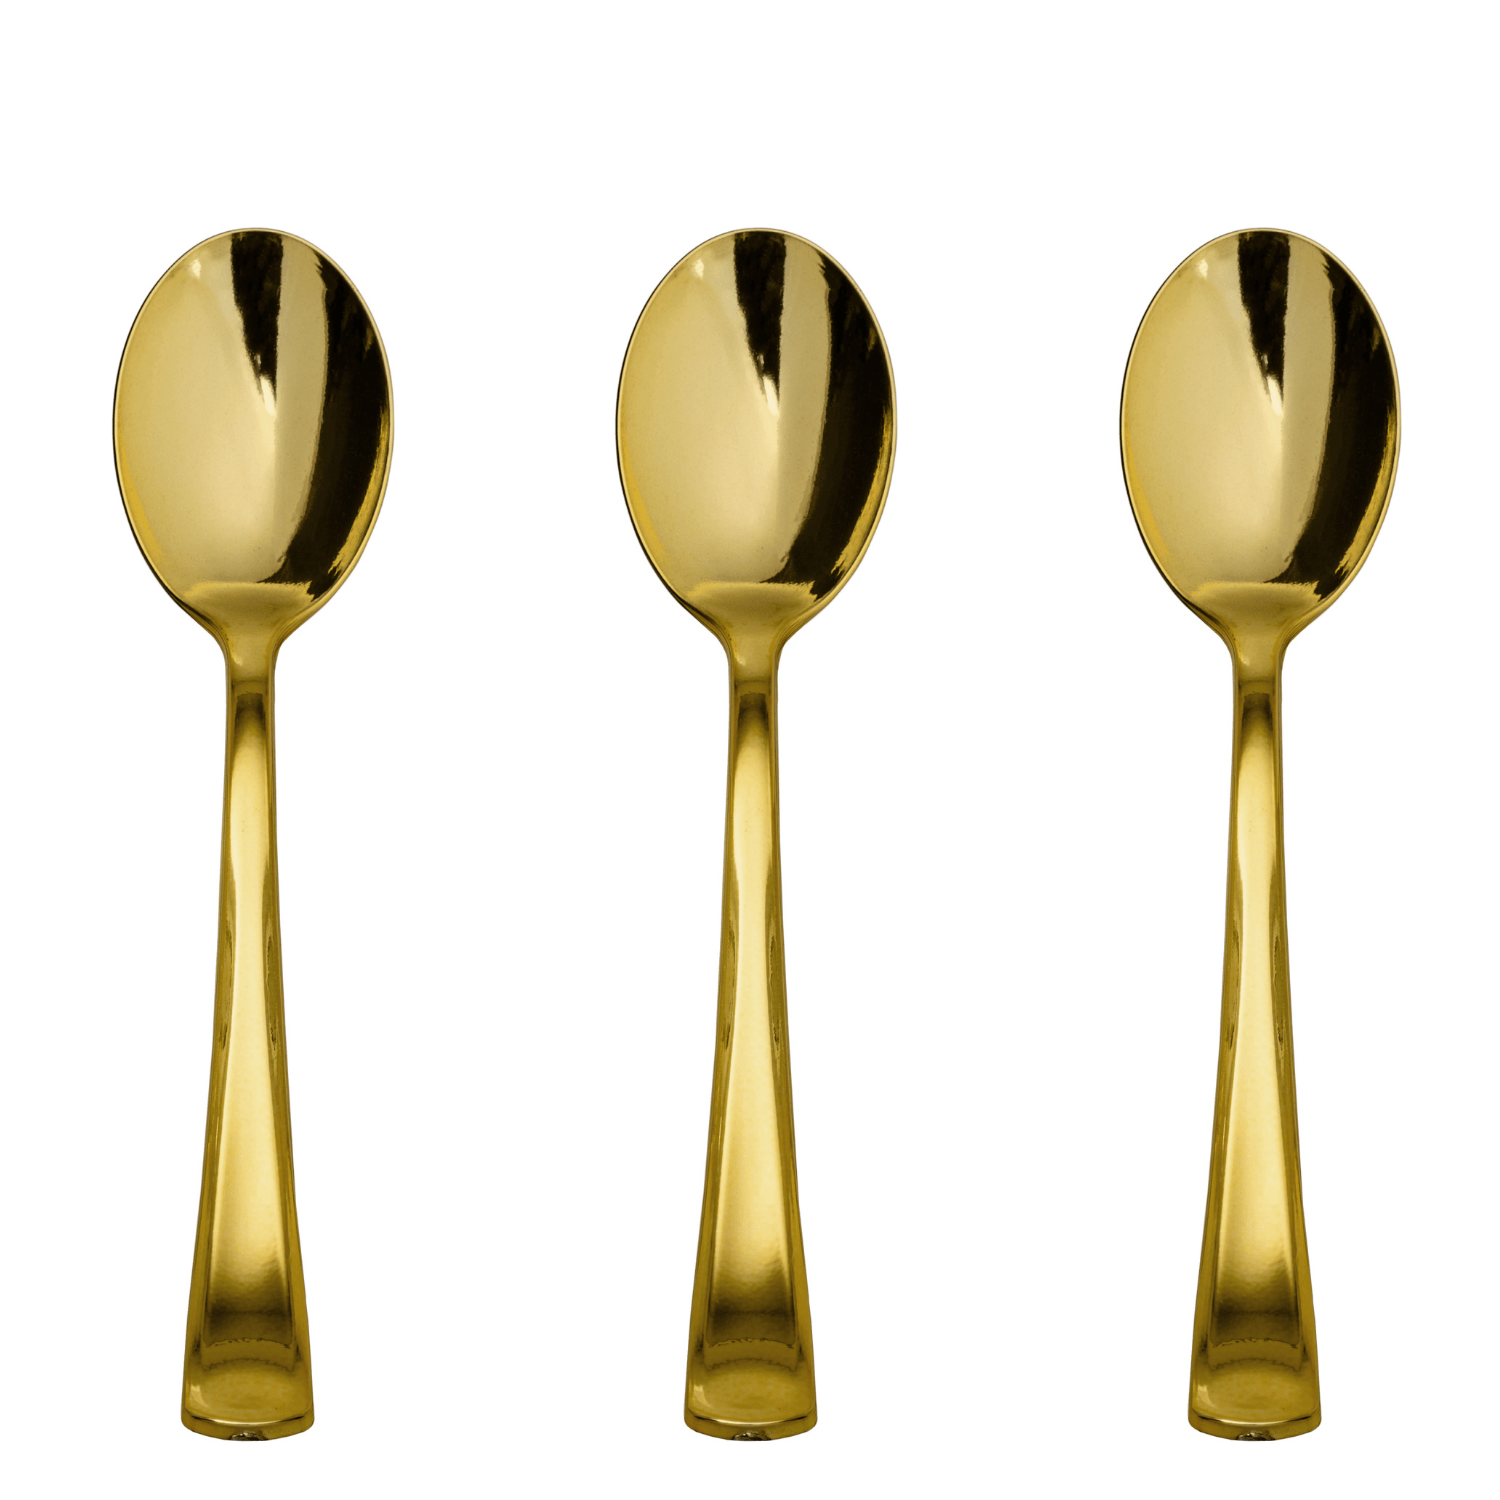 Exquisite Gold Plastic Spoons | 480 Count - Yom Tov Settings